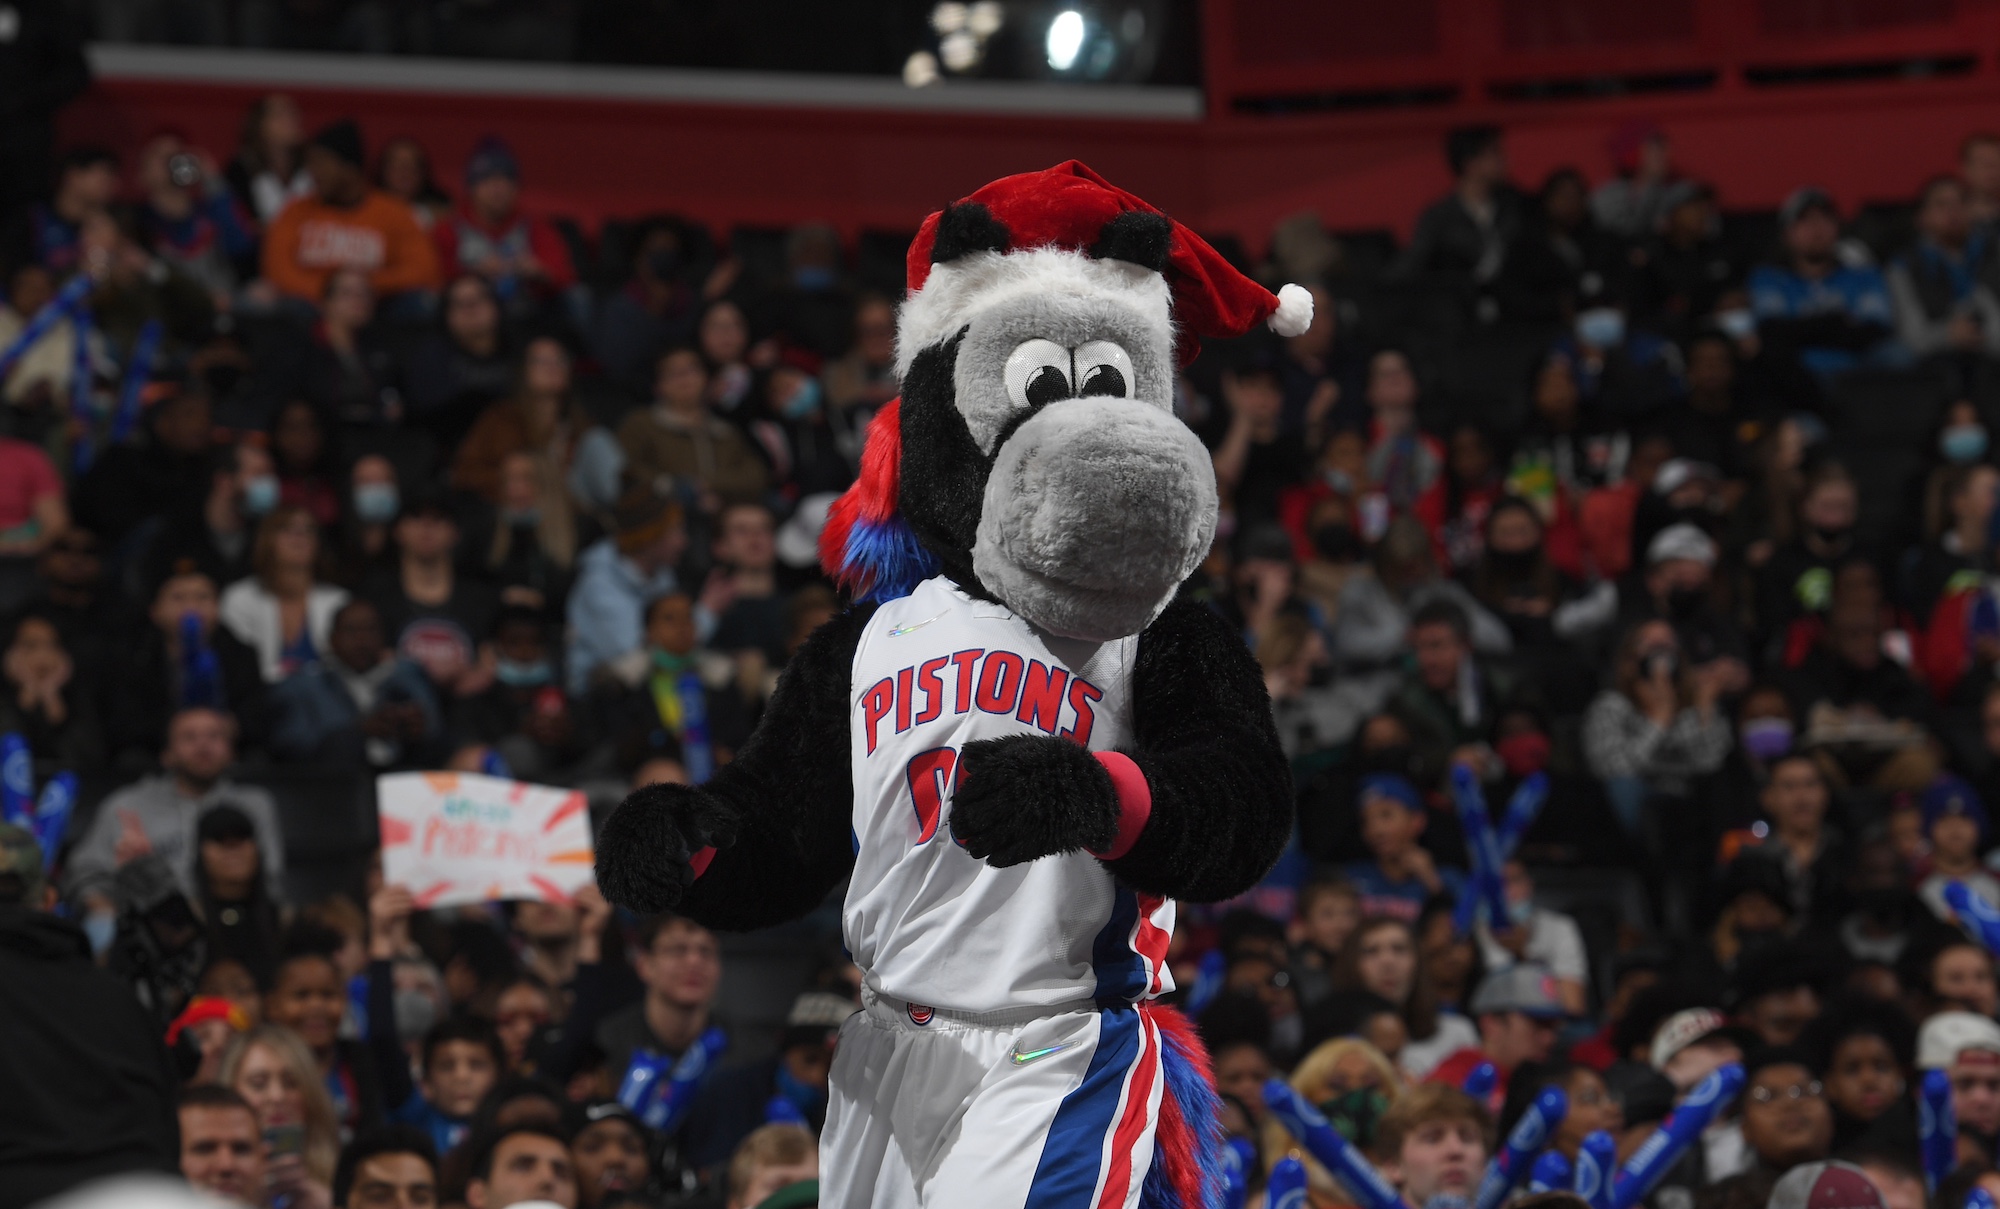 DETROIT, MI - DECEMBER 19: The Detroit Pistons mascot, Hooper, walks the stands during the game against the Miami Heat on December 19, 2021 at Little Caesars Arena in Detroit, Michigan. NOTE TO USER: User expressly acknowledges and agrees that, by downloading and/or using this photograph, User is consenting to the terms and conditions of the Getty Images License Agreement. Mandatory Copyright Notice: Copyright 2021 NBAE (Photo by Chris Schwegler/NBAE via Getty Images)